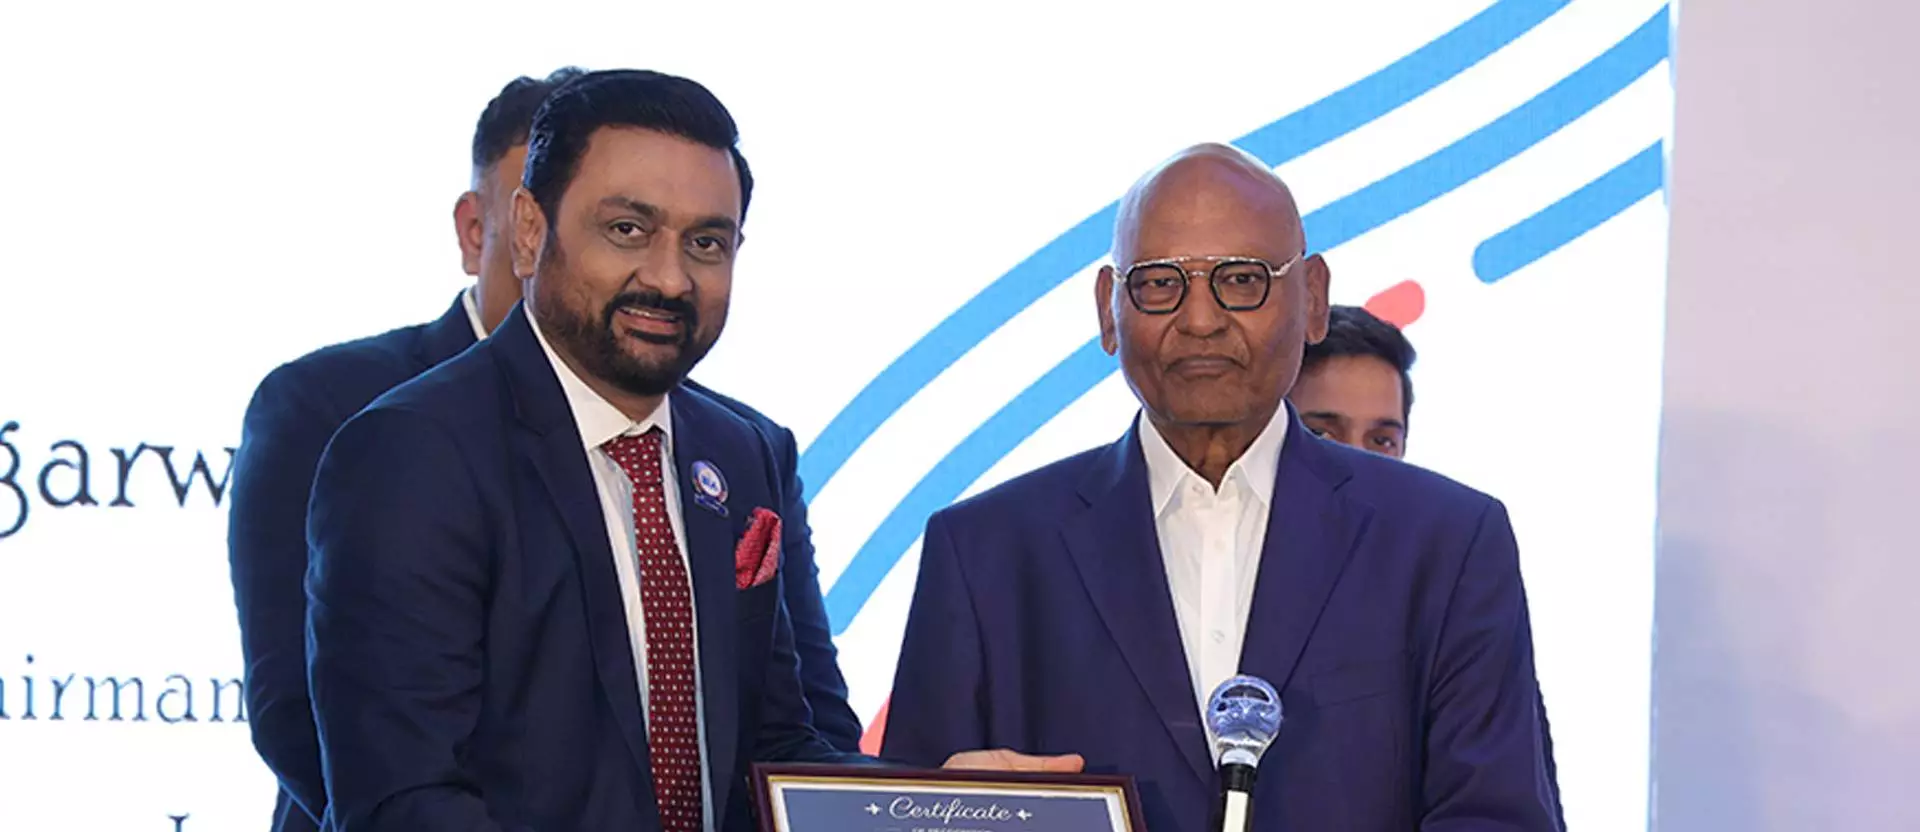 58th Installation Ceremony of Bombay Industries Association BIA where Mr. Nevil Sanghvi was inducted as the 58th President. President Mr. Nevil Sanghvi with Chief Guest Mr. Anil Agarwal